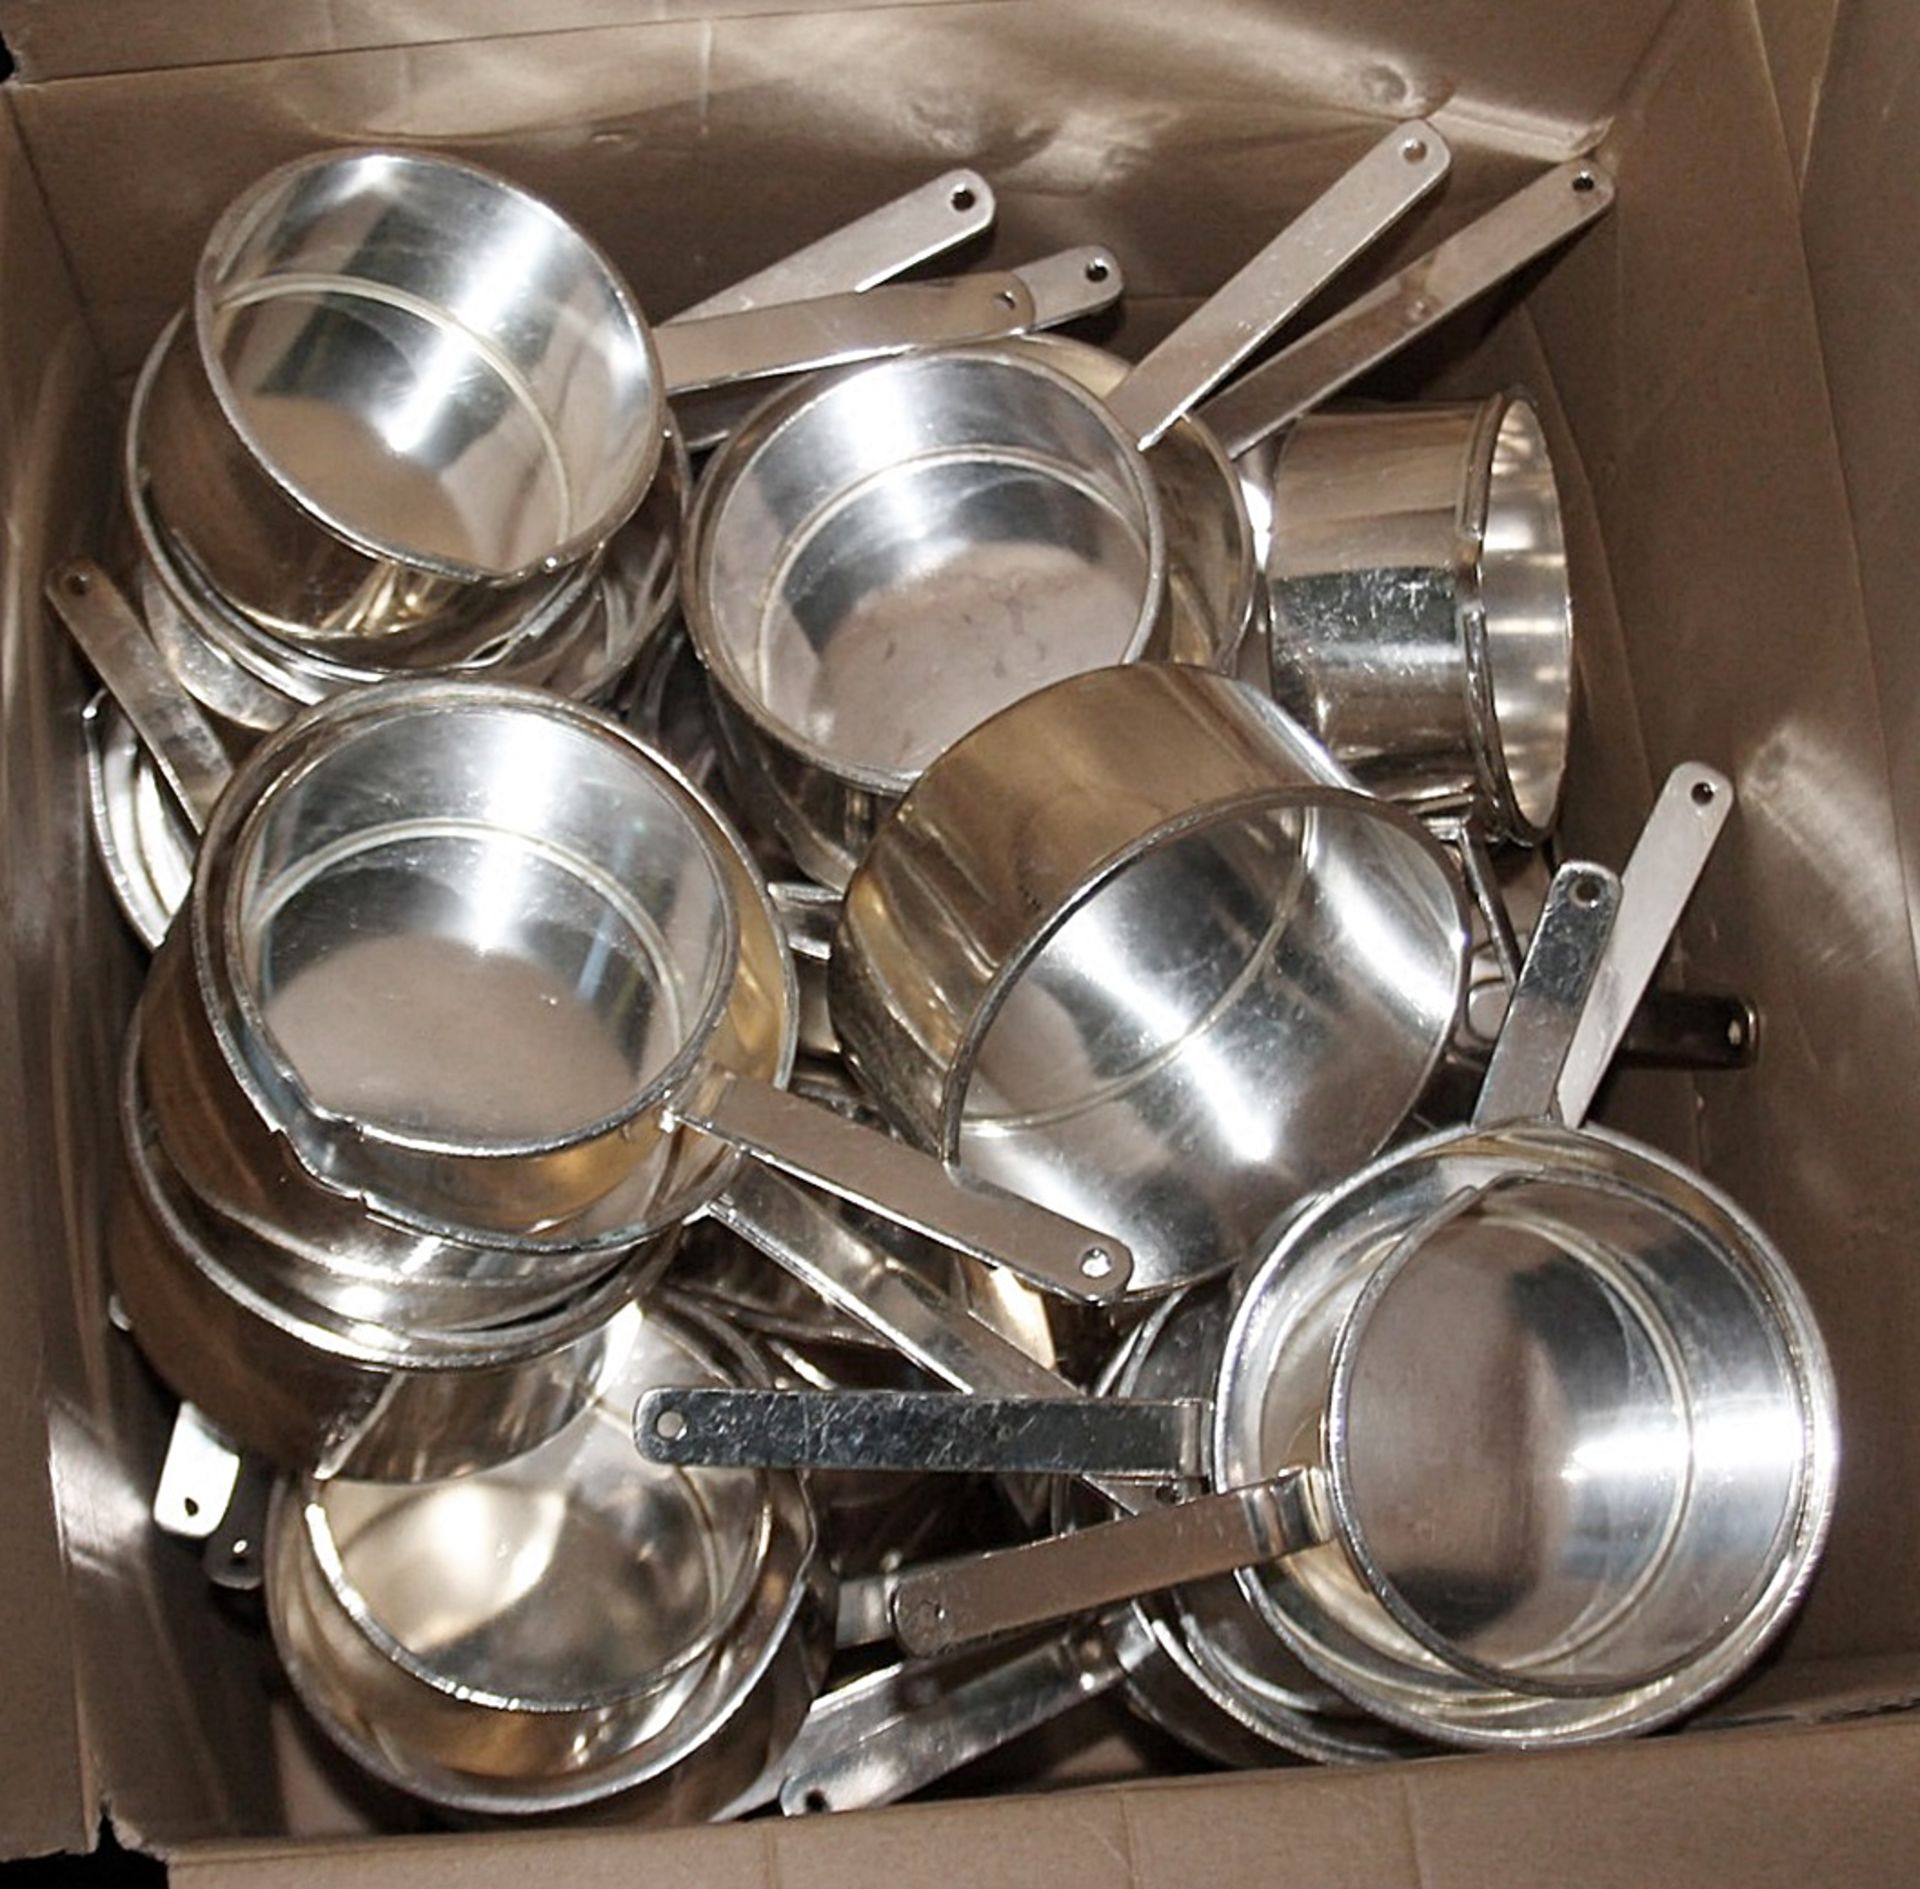 40 x Milk / Sauce Pans - Various Sizes - Recently Removed From A Well-known Restaurant - Image 3 of 4